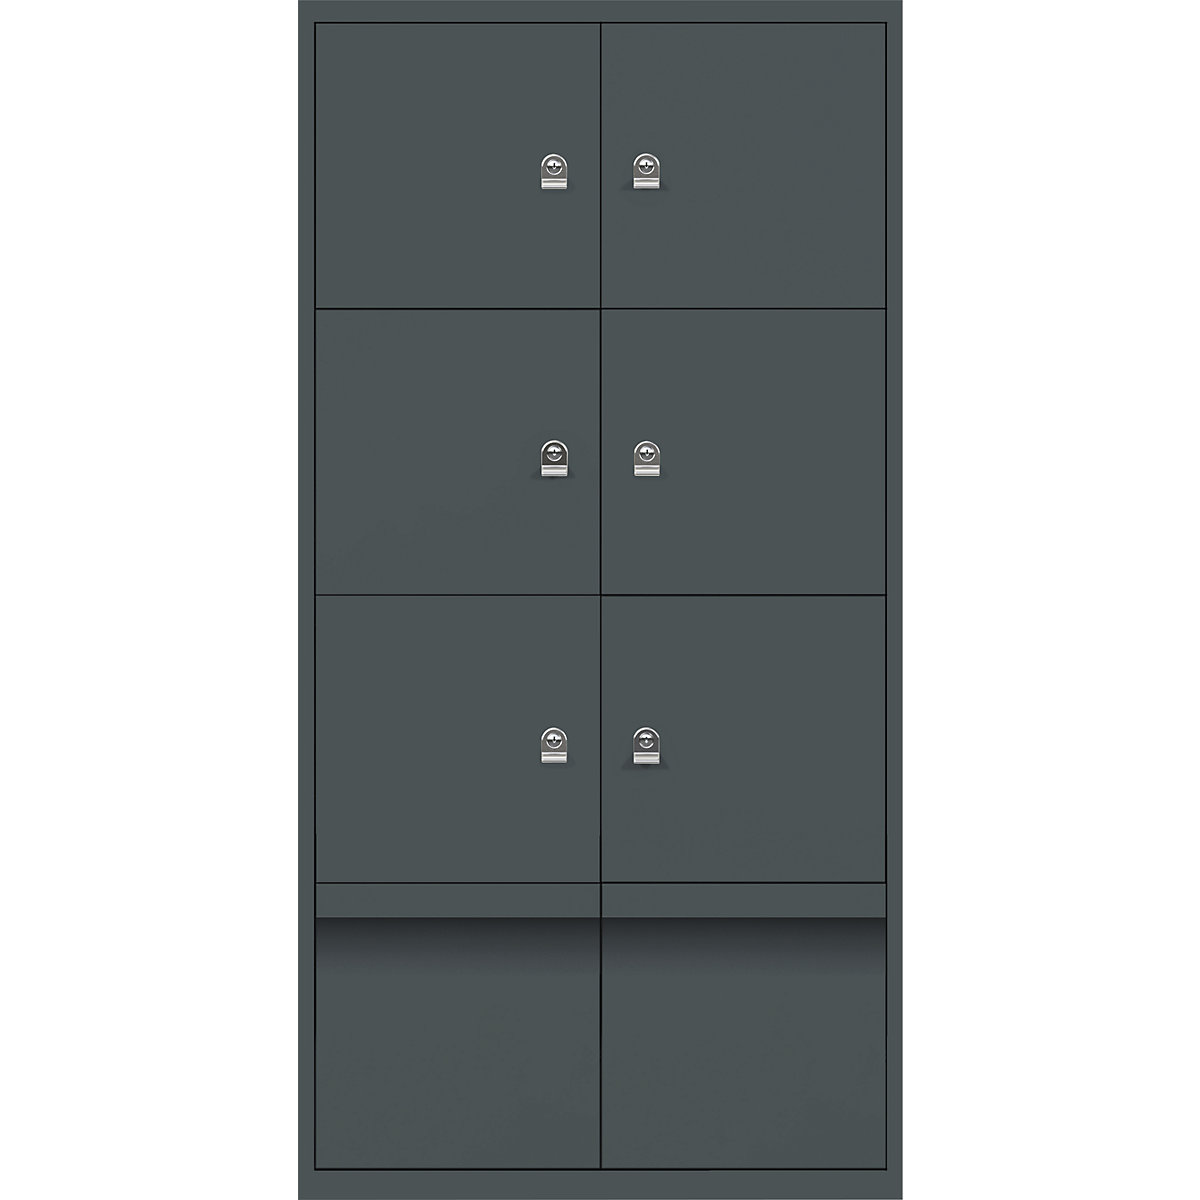 BISLEY – LateralFile™ lodge, with 6 lockable compartments and 2 drawers, height 375 mm each, charcoal